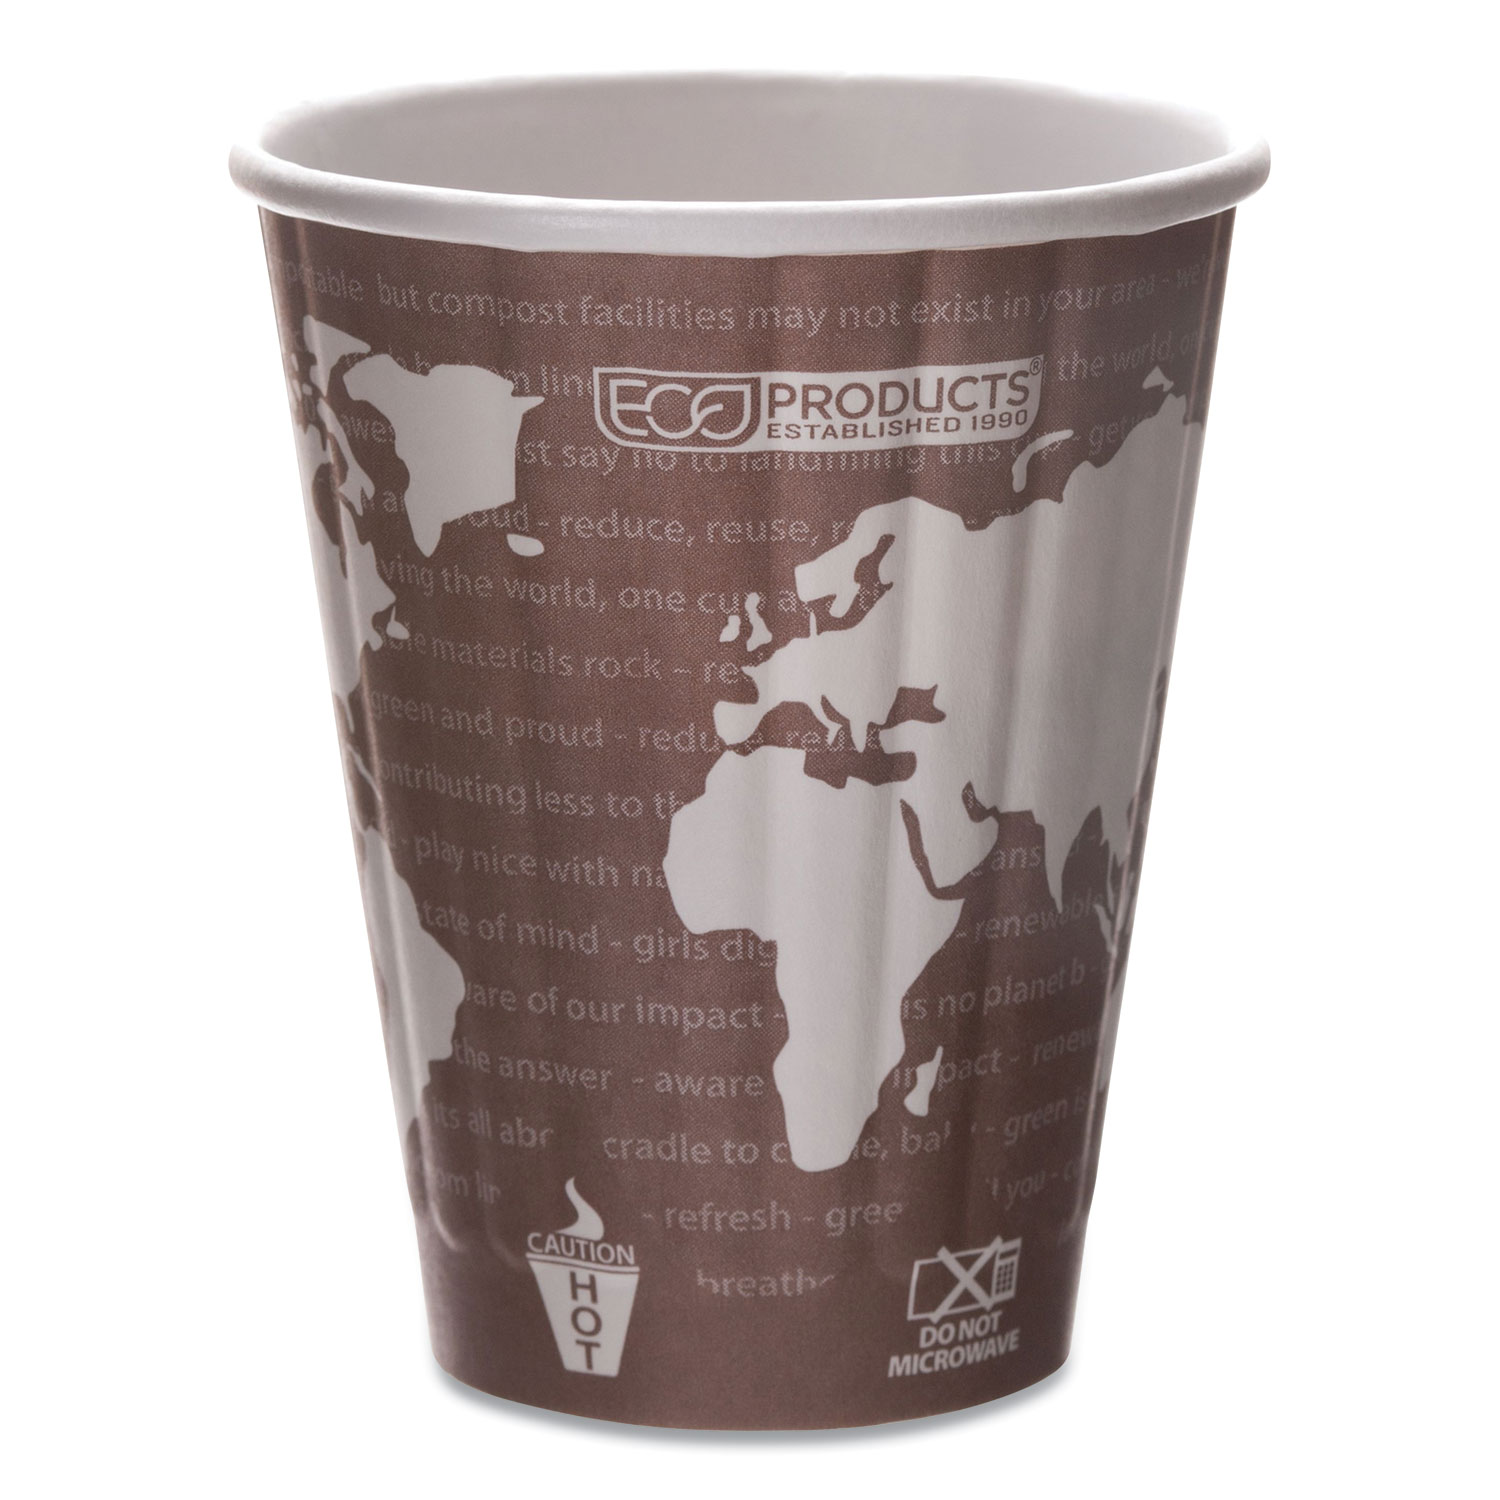  Eco-Products EP-BNHC8-WD World Art Renewable and Compostable Insulated Hot Cups, PLA, 8 oz, 40/Pack, 20 Packs/Carton (ECOEPBNHC8WD) 